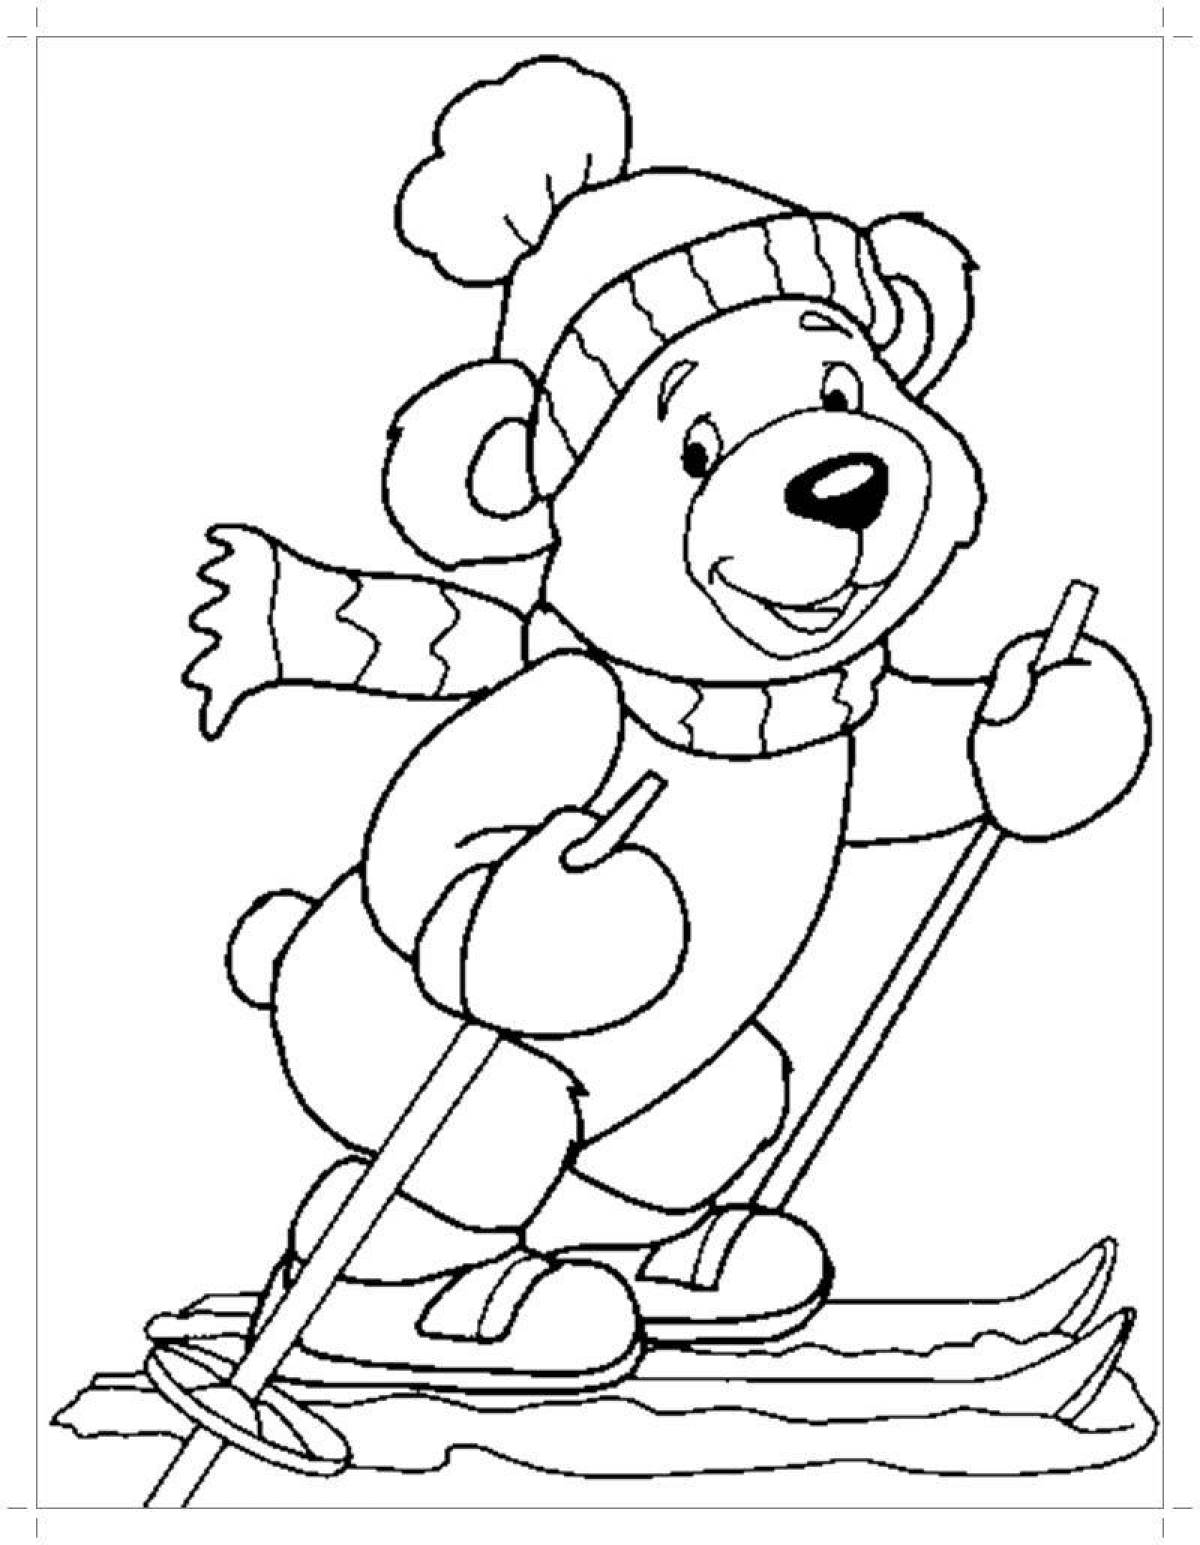 Delightful winter coloring book for 3-4 year olds